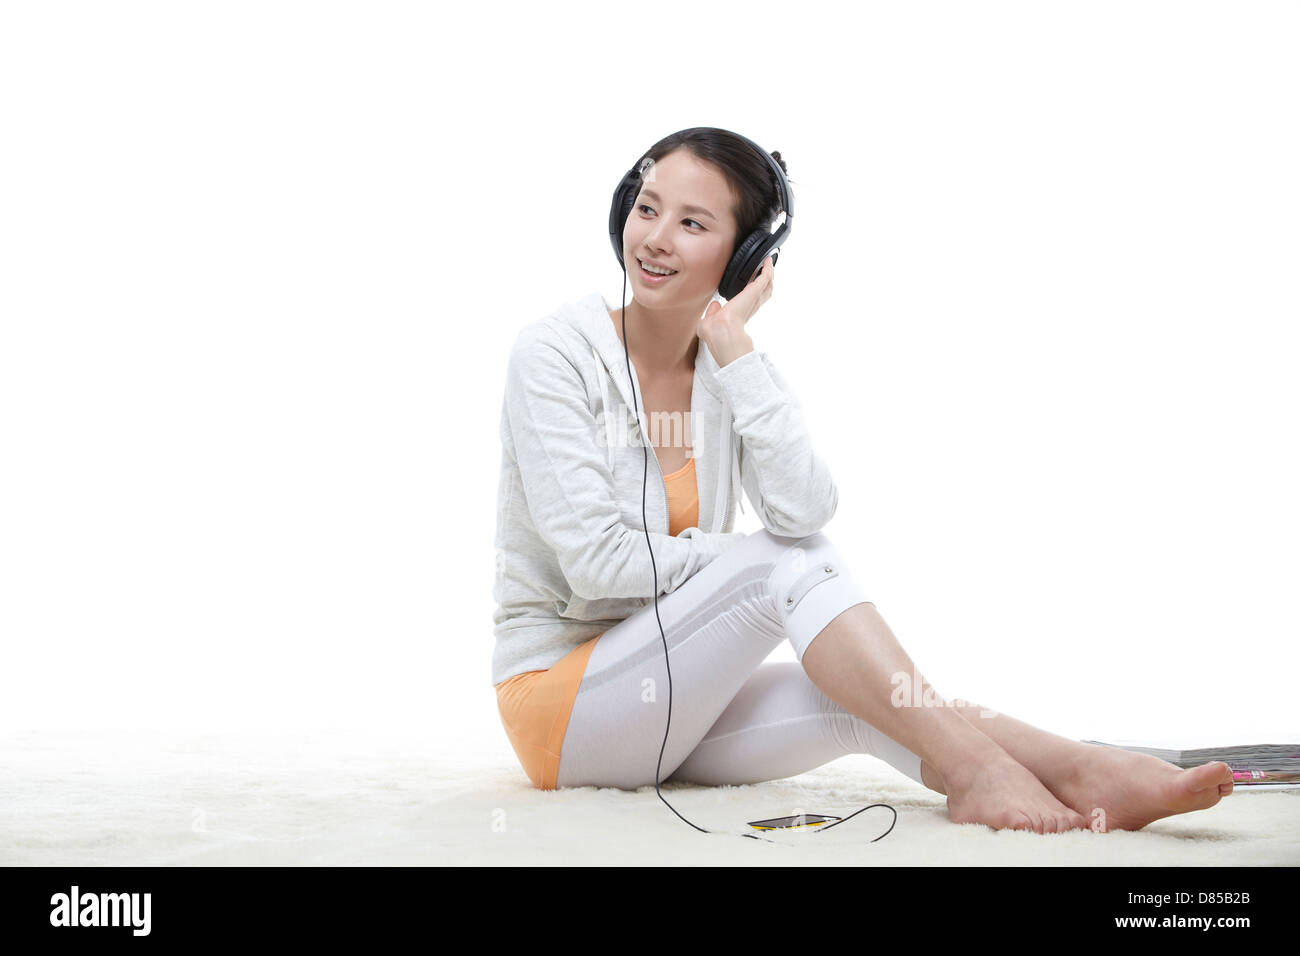 young woman sitting listening to music. Stock Photo